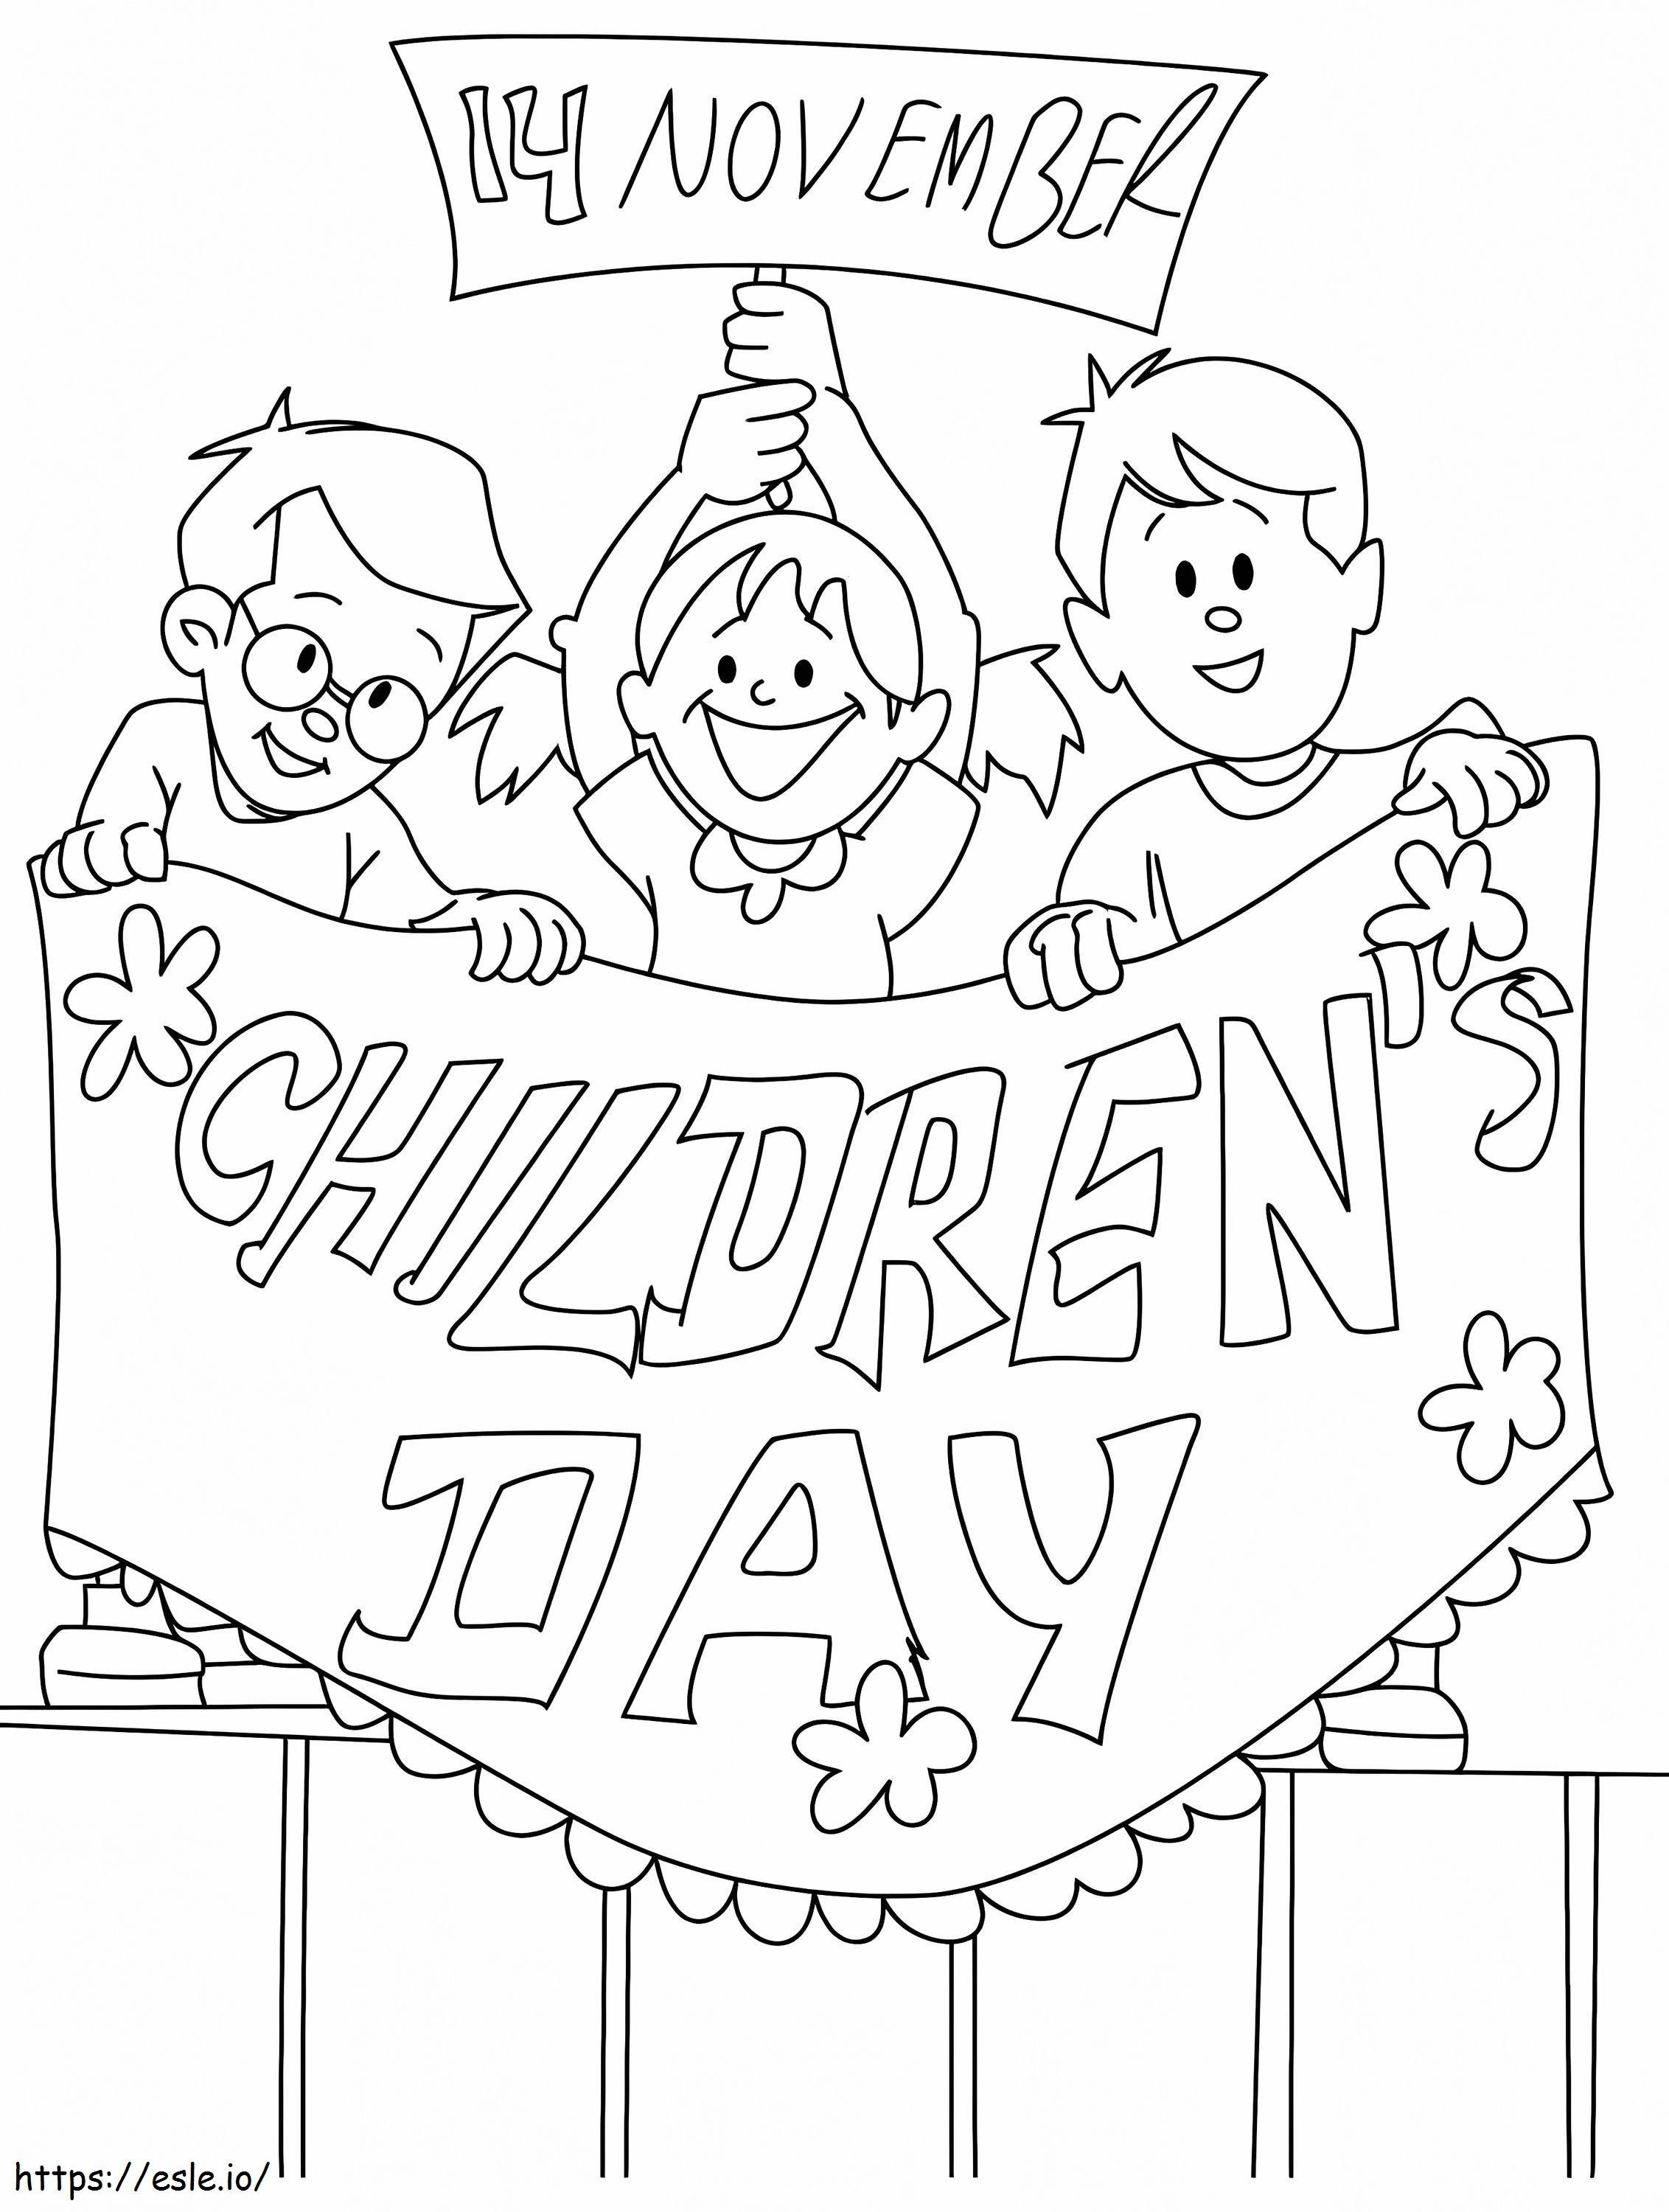 Childrens Day 2 coloring page